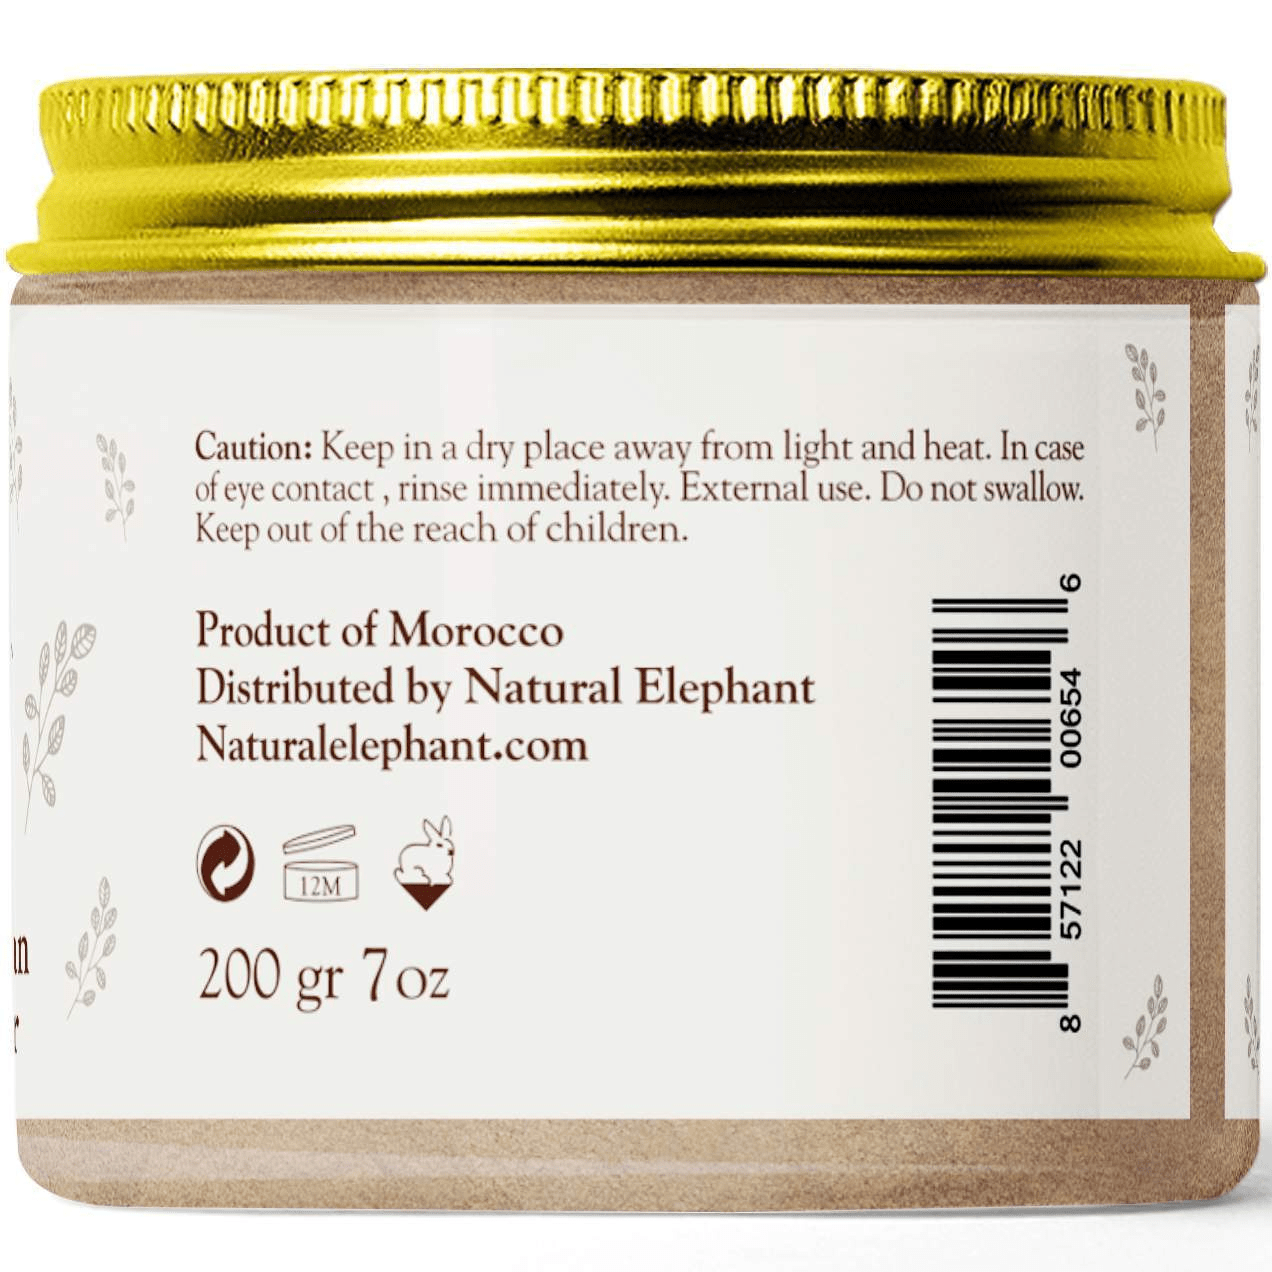 Natural Elephant Ghassoul Moroccan Lava Clay Powder-Natural Elephant-BB_Bath and Shower,BB_Scrubs and Exfoliators,Brand_Natural Elephant,Collection_Bath and Body,Collection_Hair,Collection_Skincare,Concern_Dry Skin,Concern_Dryness,Concern_Dullness,Concern_Eczema,Concern_Large Pores,Concern_Oily Skin,Concern_Psoriasis,Concern_Redness,Concern_Sensitive Skin,FABS_Friday2022,Hair_Conditioner,Hair_Hair Mask,NATURAL_Morroccan Collection,Skincare_Cleansers,Skincare_Masks